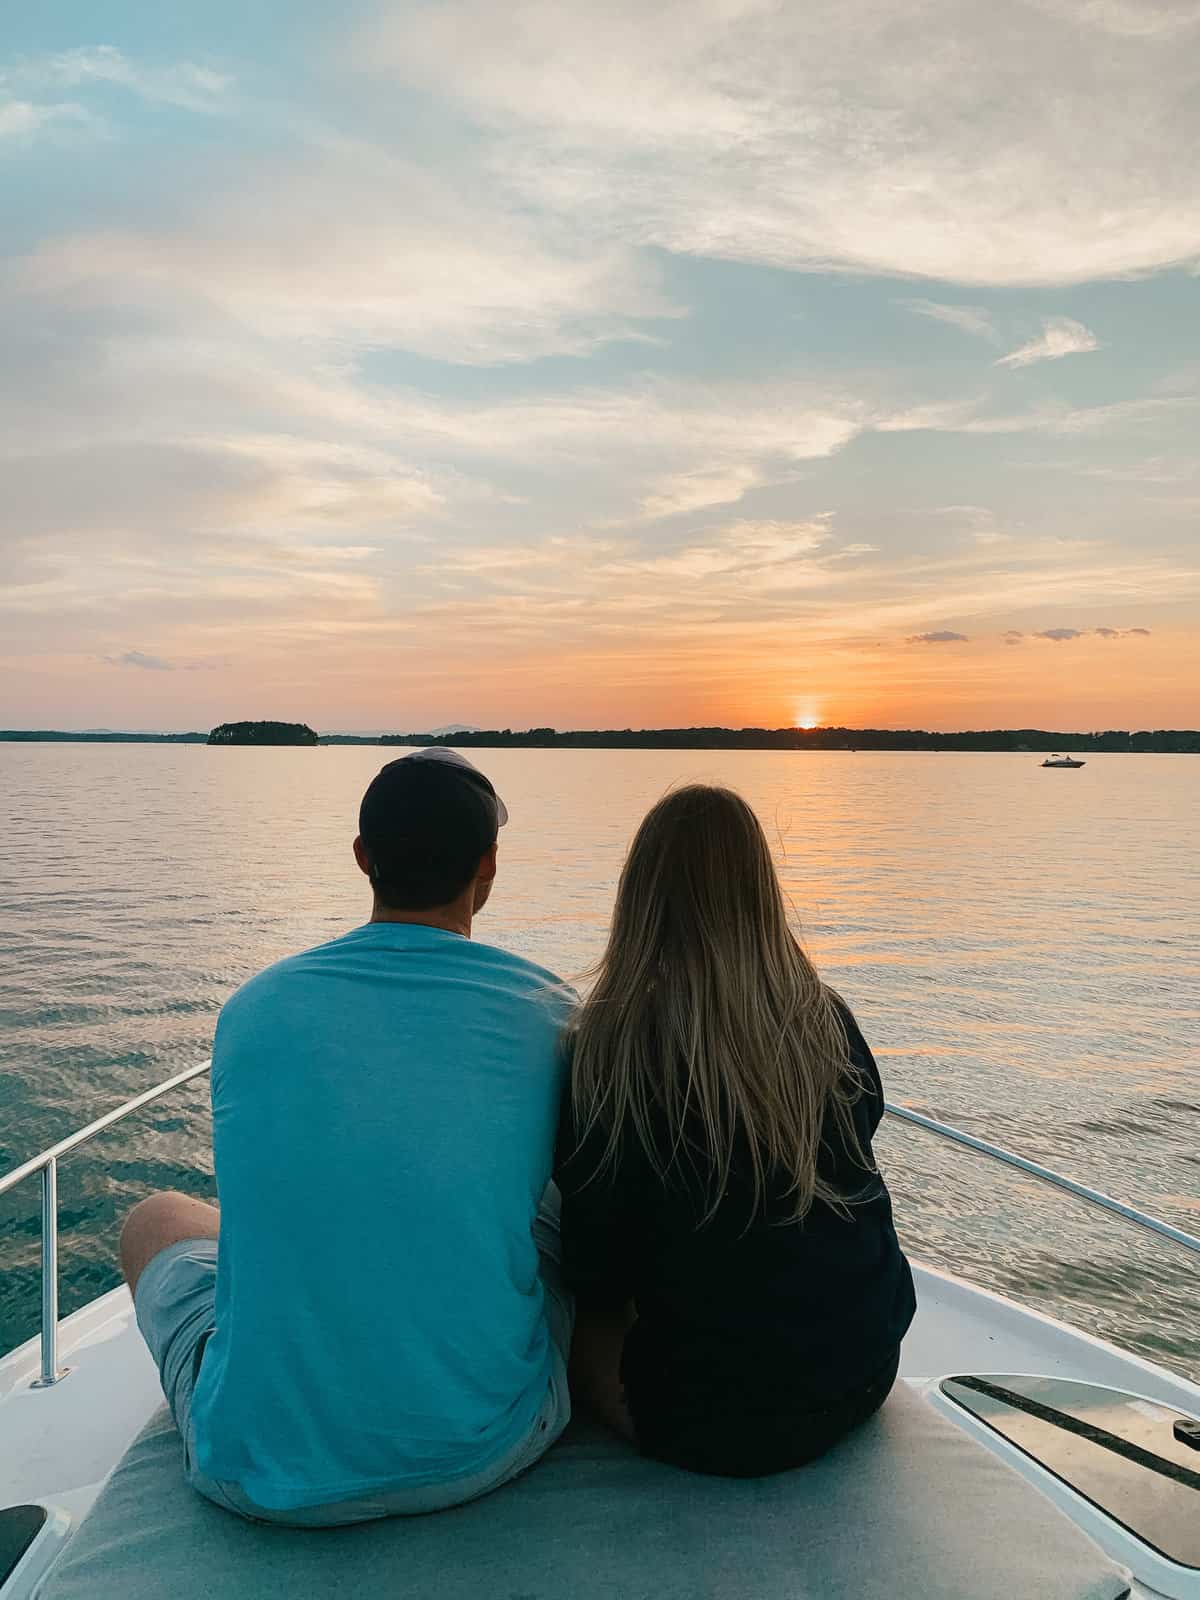 Sam and Abby watching a sunset on a boat at SML.